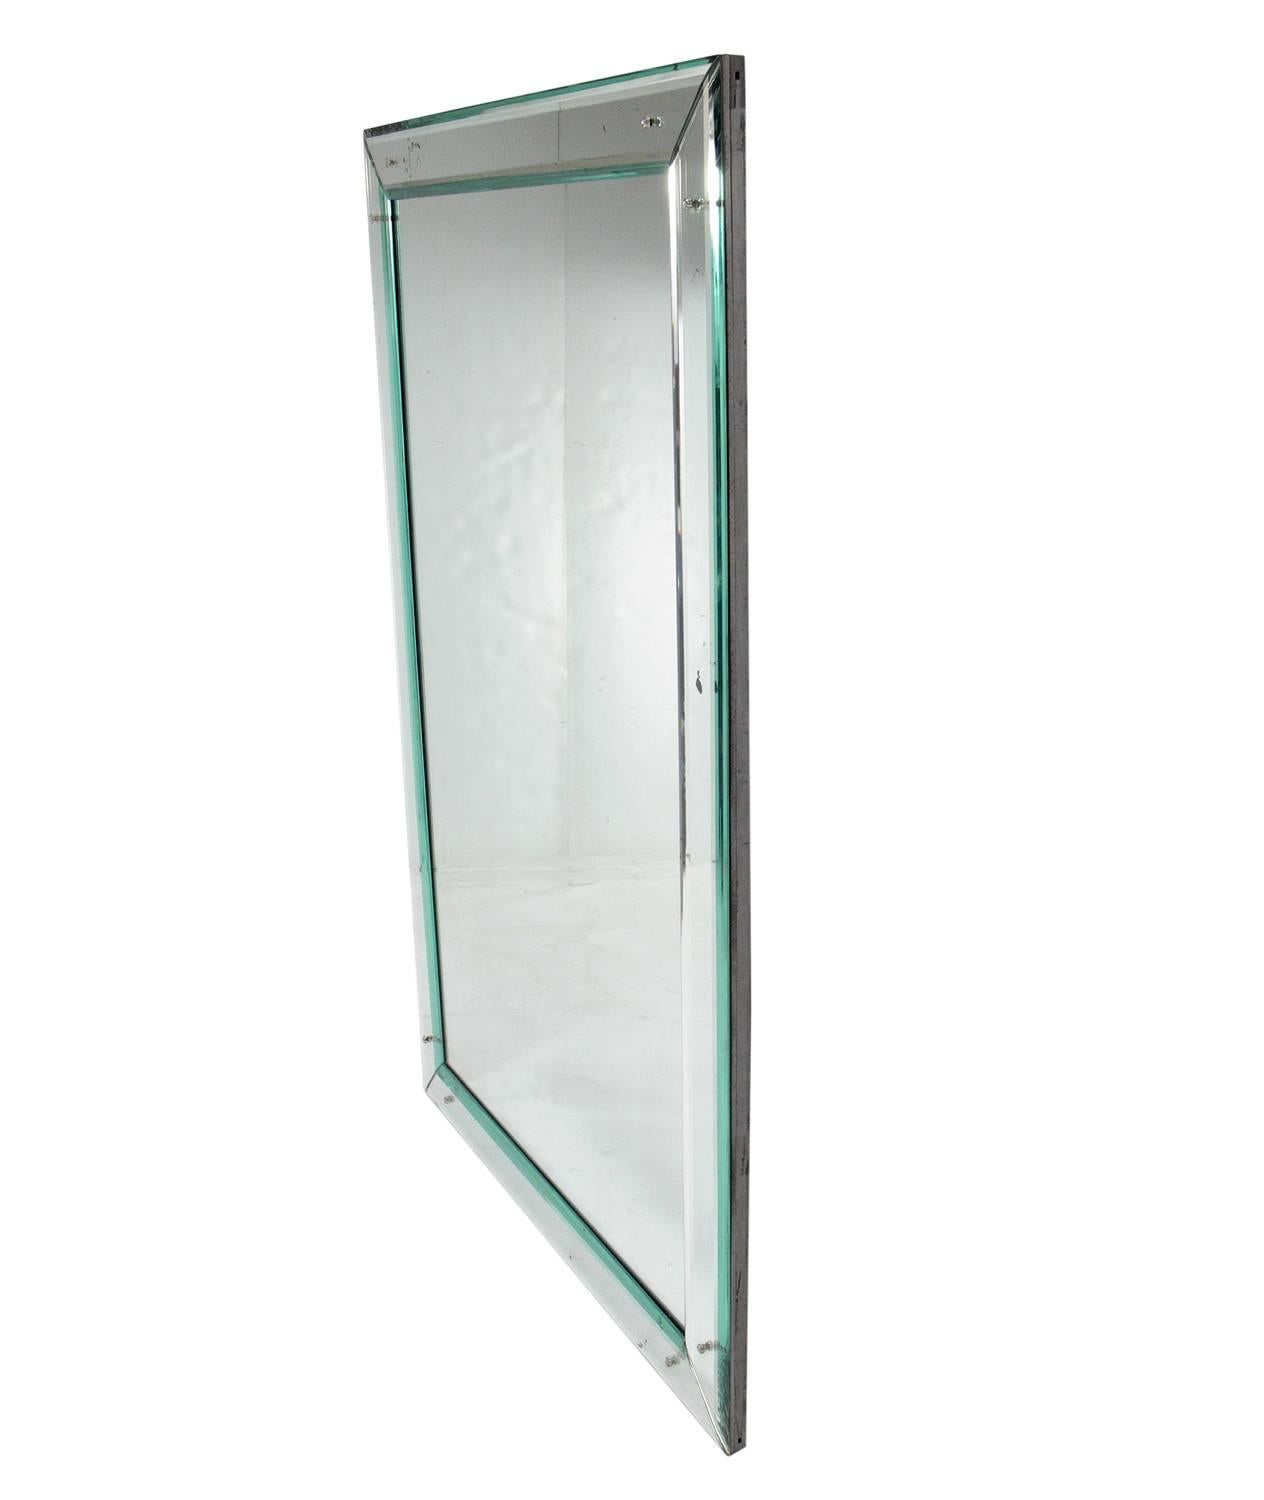 Large-scale clean lined mirror, American, circa 1950s. It measures an impressive 59.5